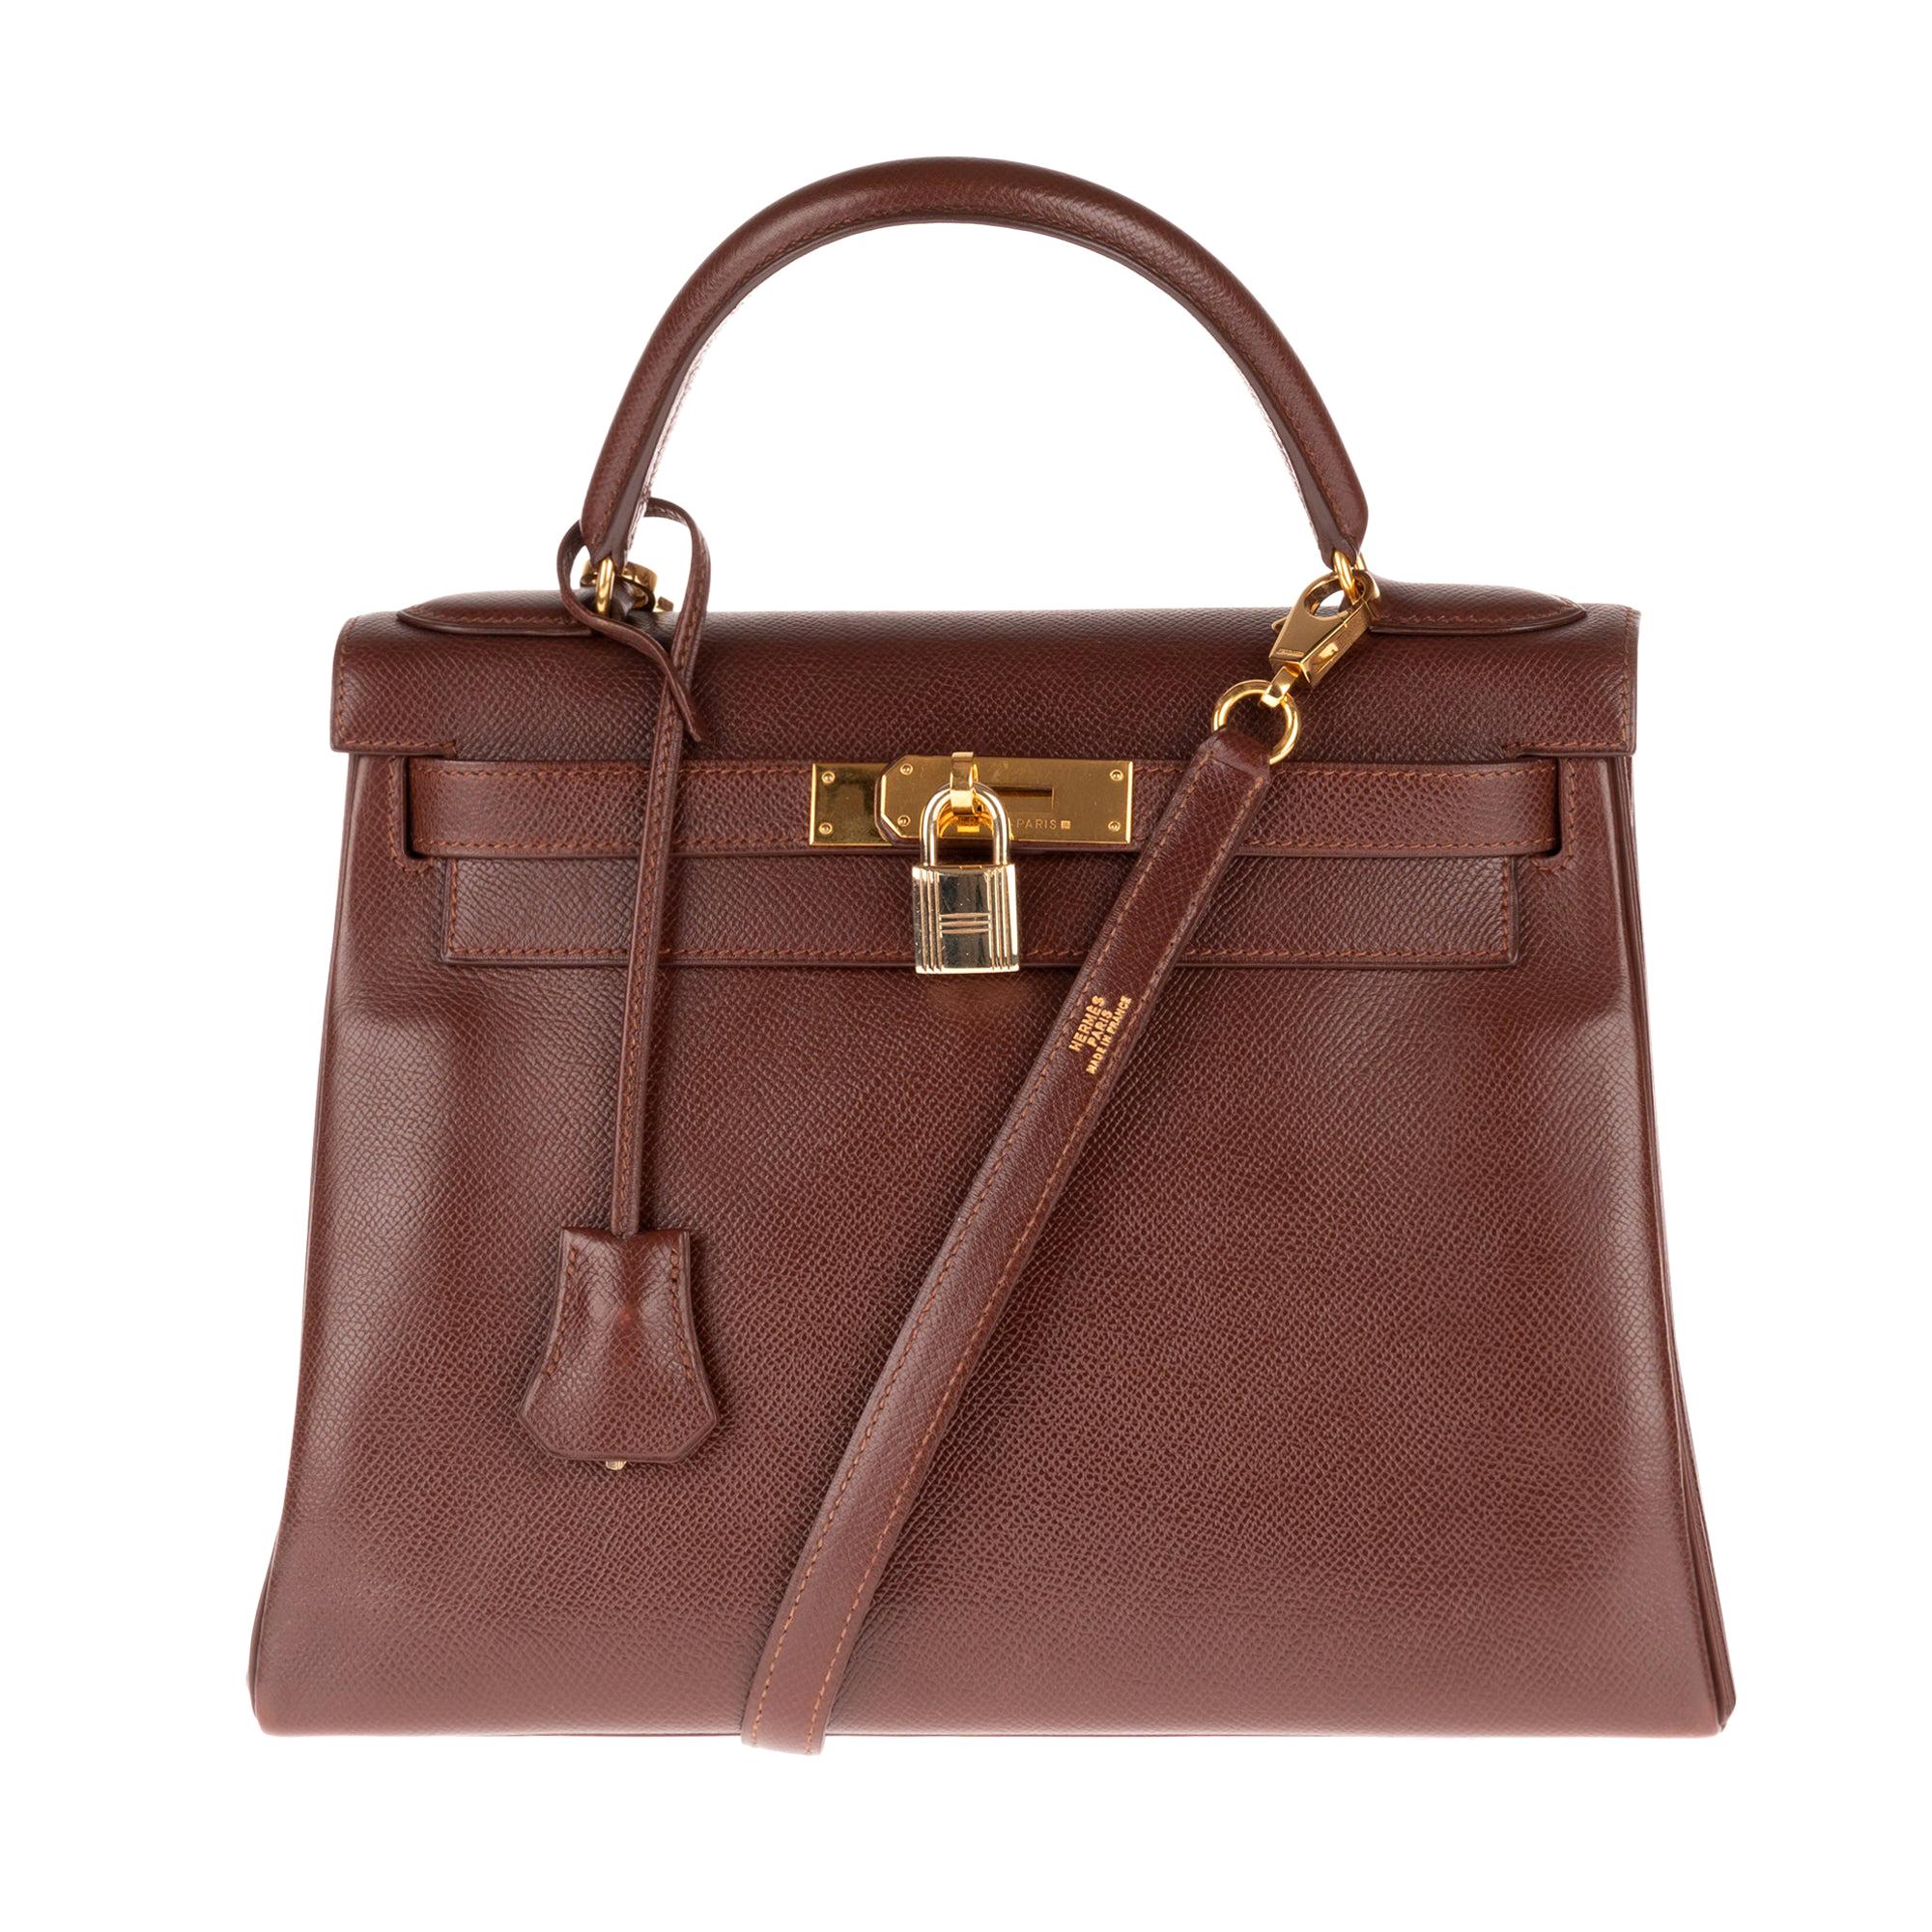 Hermès Kelly 28 handbag in Courchevel Brown leather with strap, gold hardware !